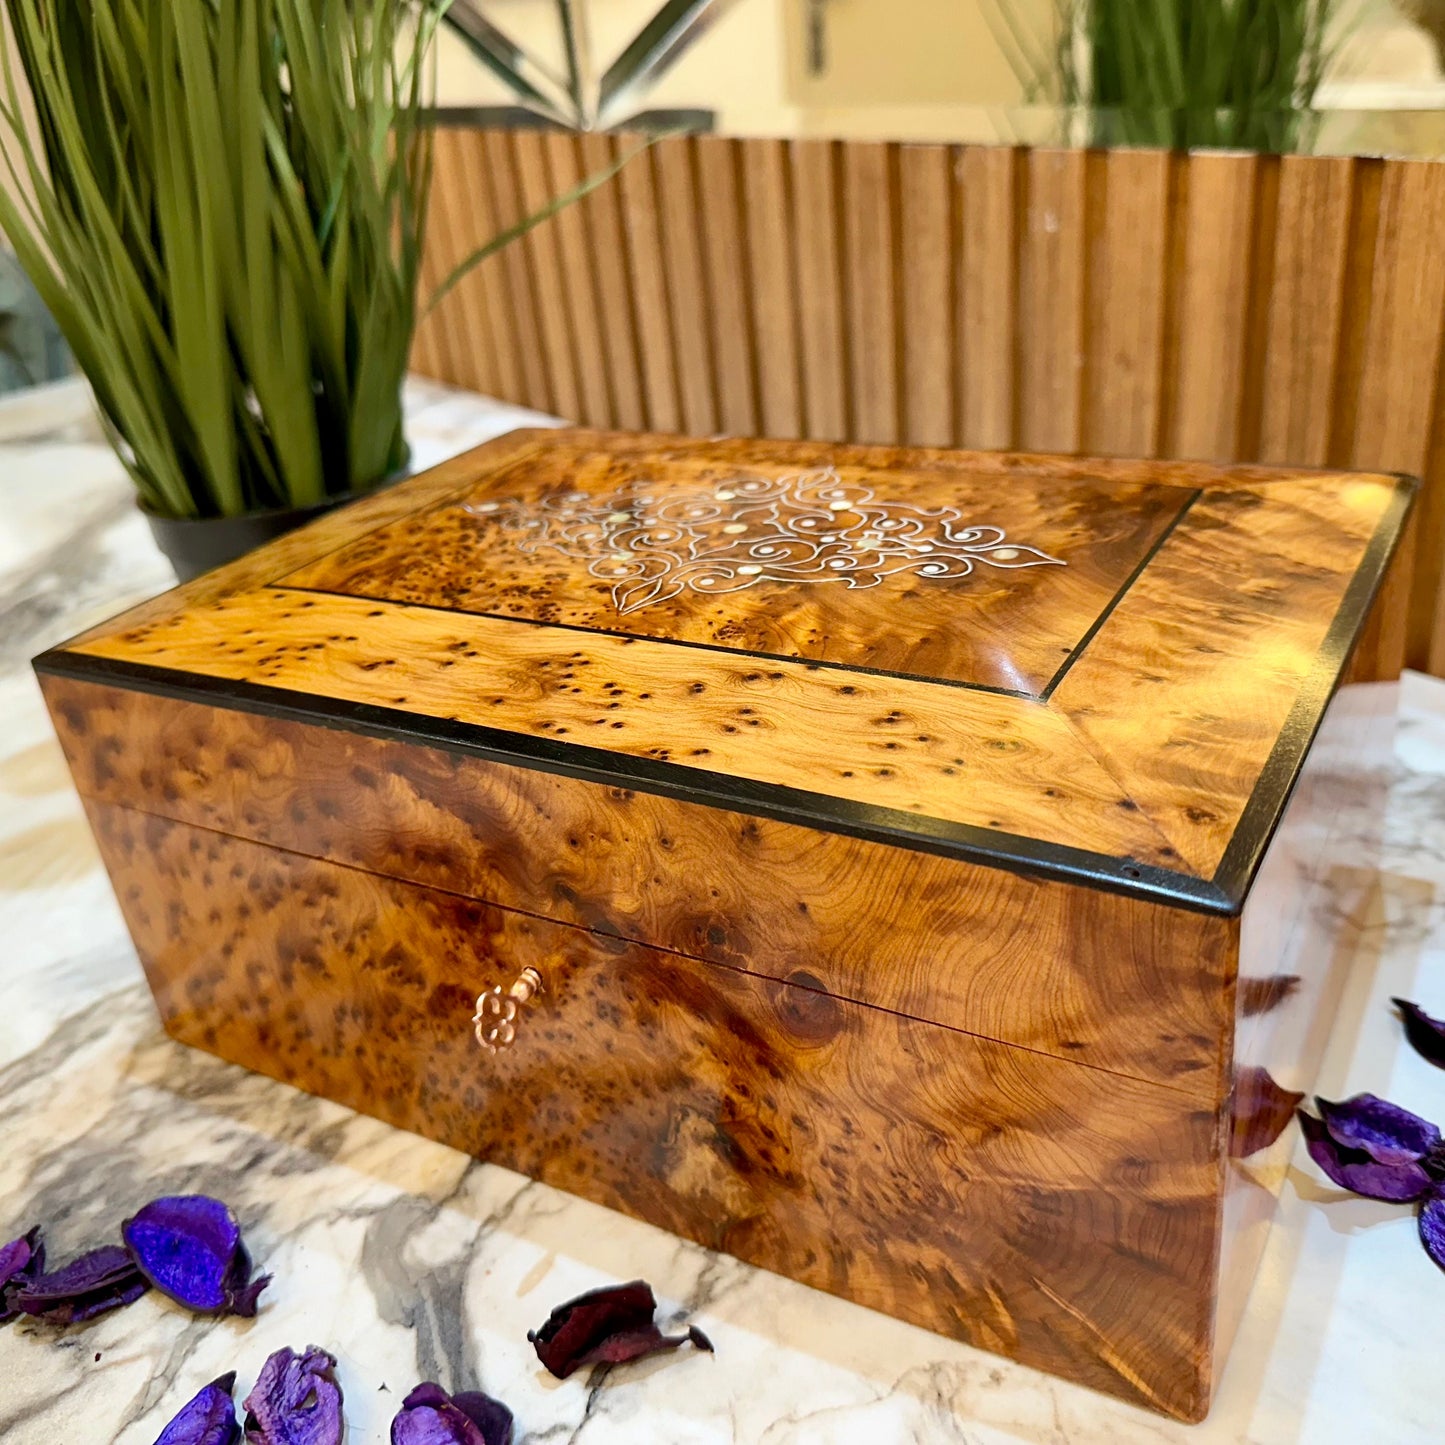 11"x7" Wooden stash box,Storage box,juniper jewelry Box wood engraved with mother of pearls,brass inlay,lockable wooden jewelry Box with key